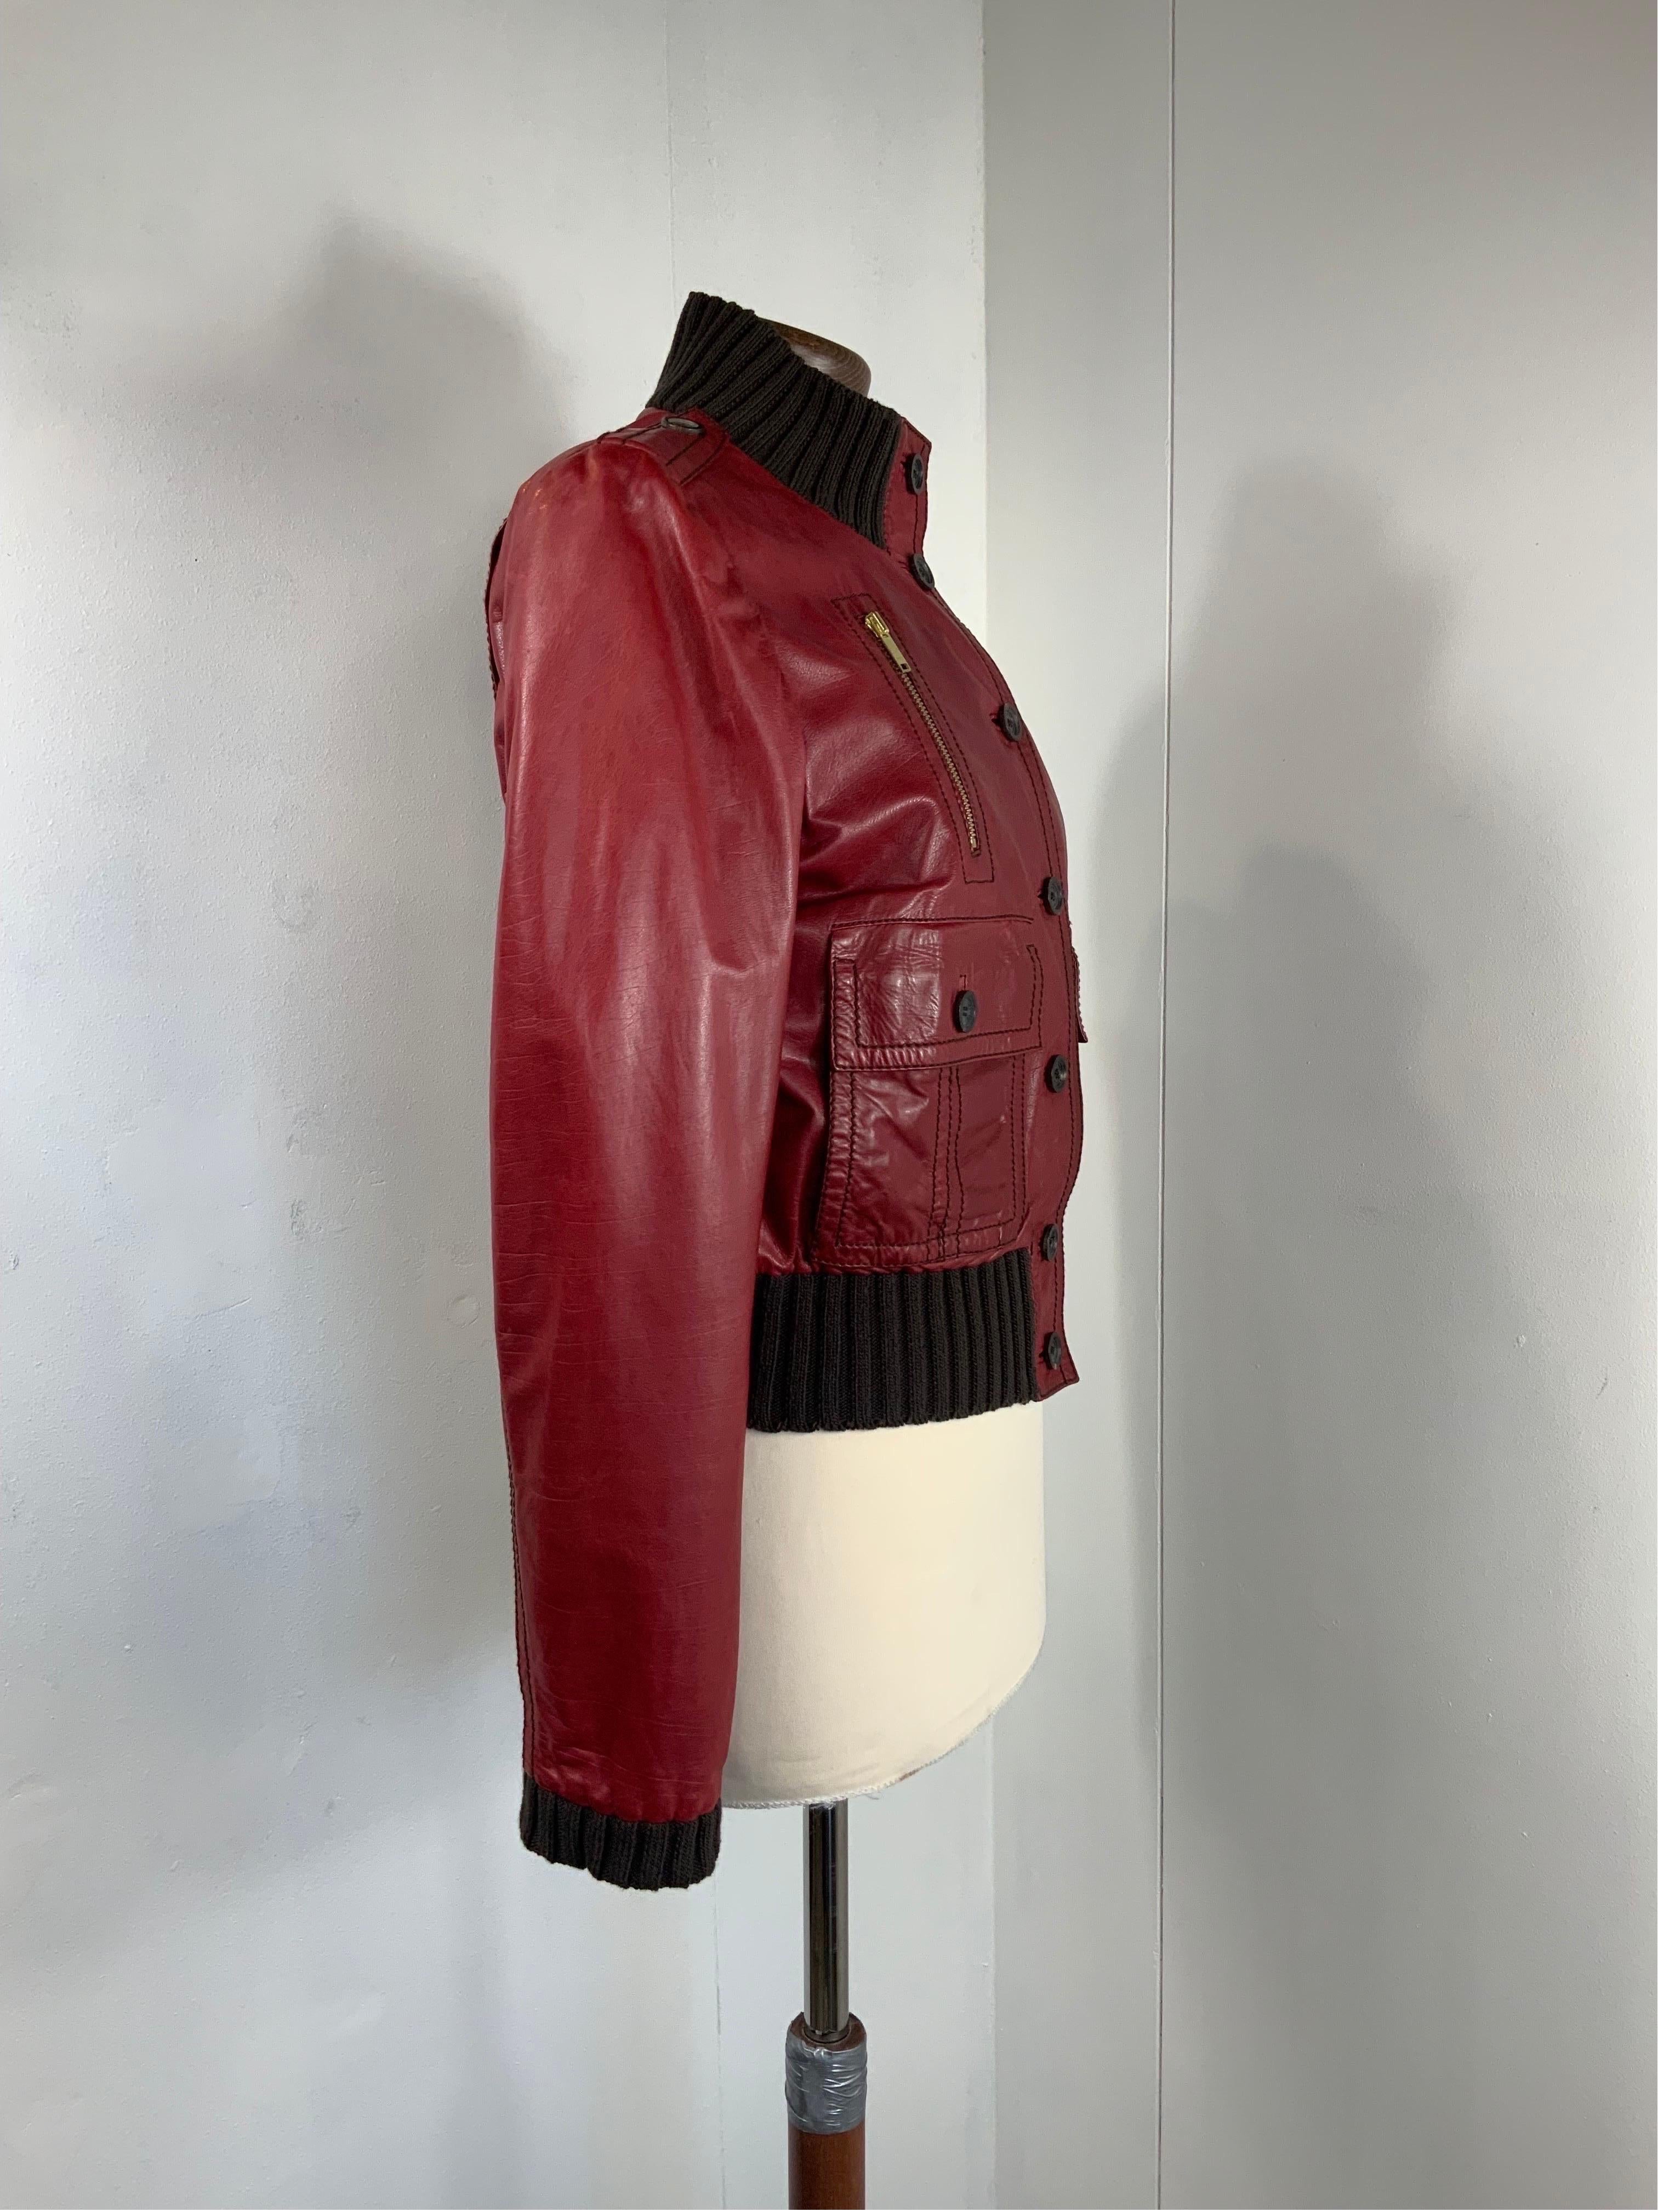 gucci madonna leather jacket